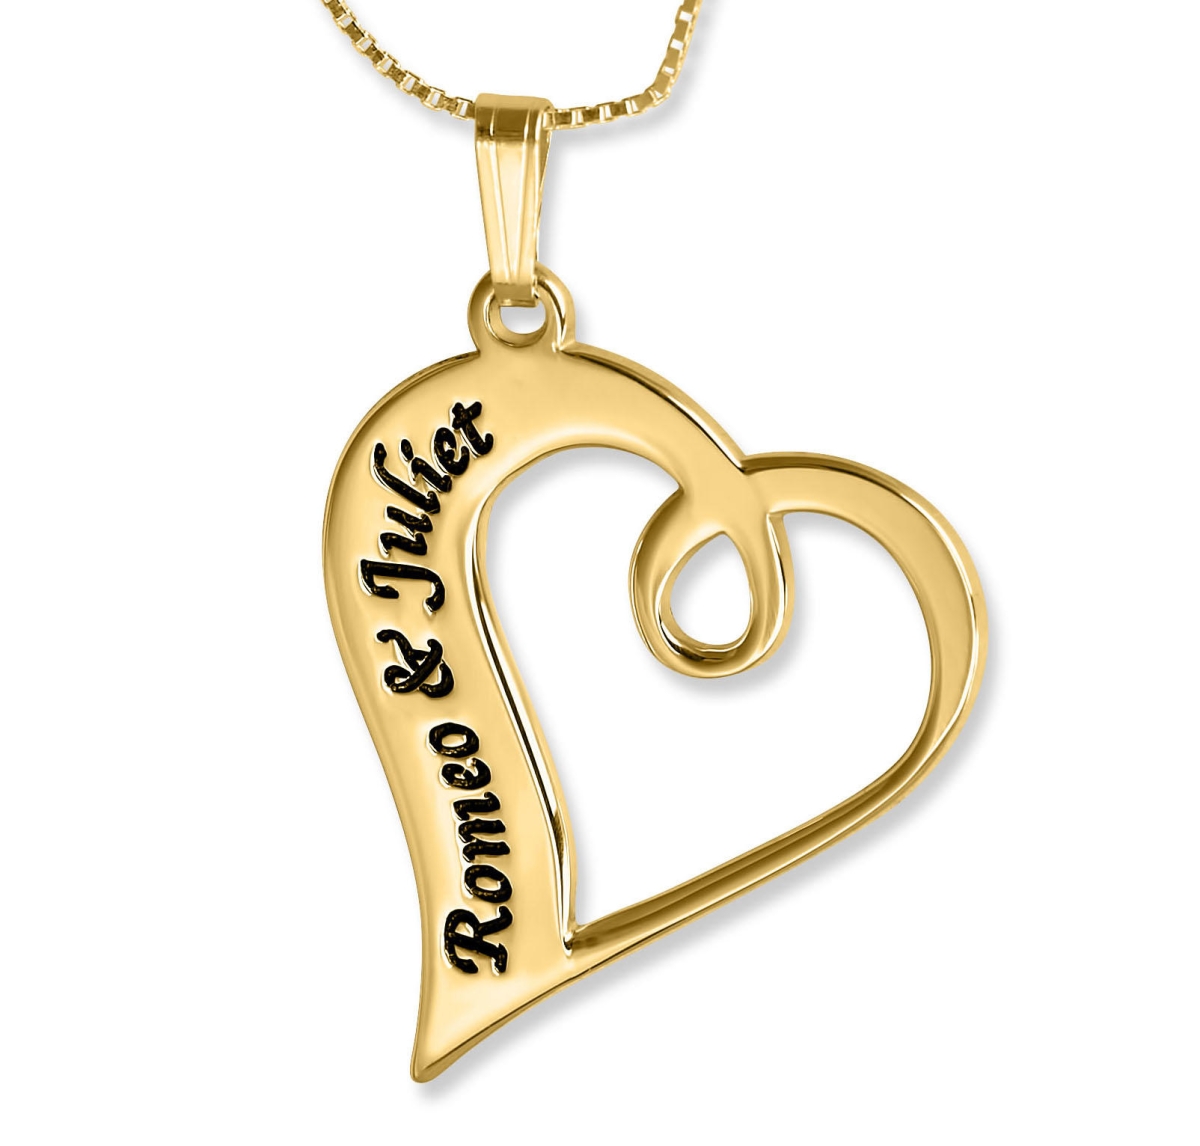 Couples Name Necklace, Twisted Heart Romantic Pendant, 24k Gold Plated - 1